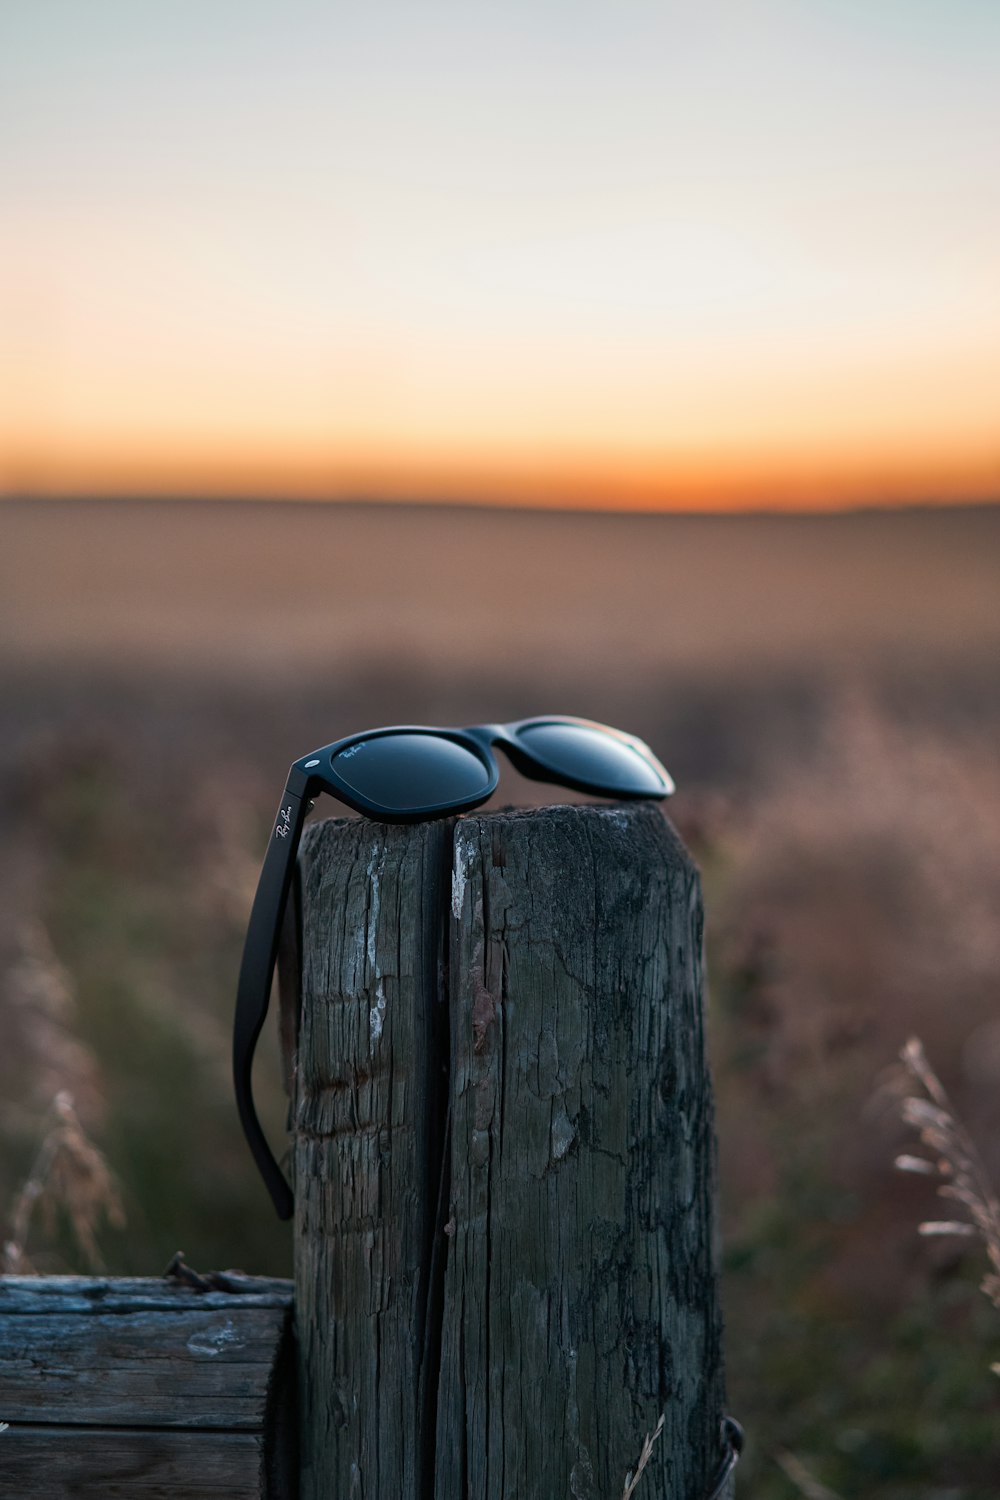 a pair of sunglasses on a wooden post